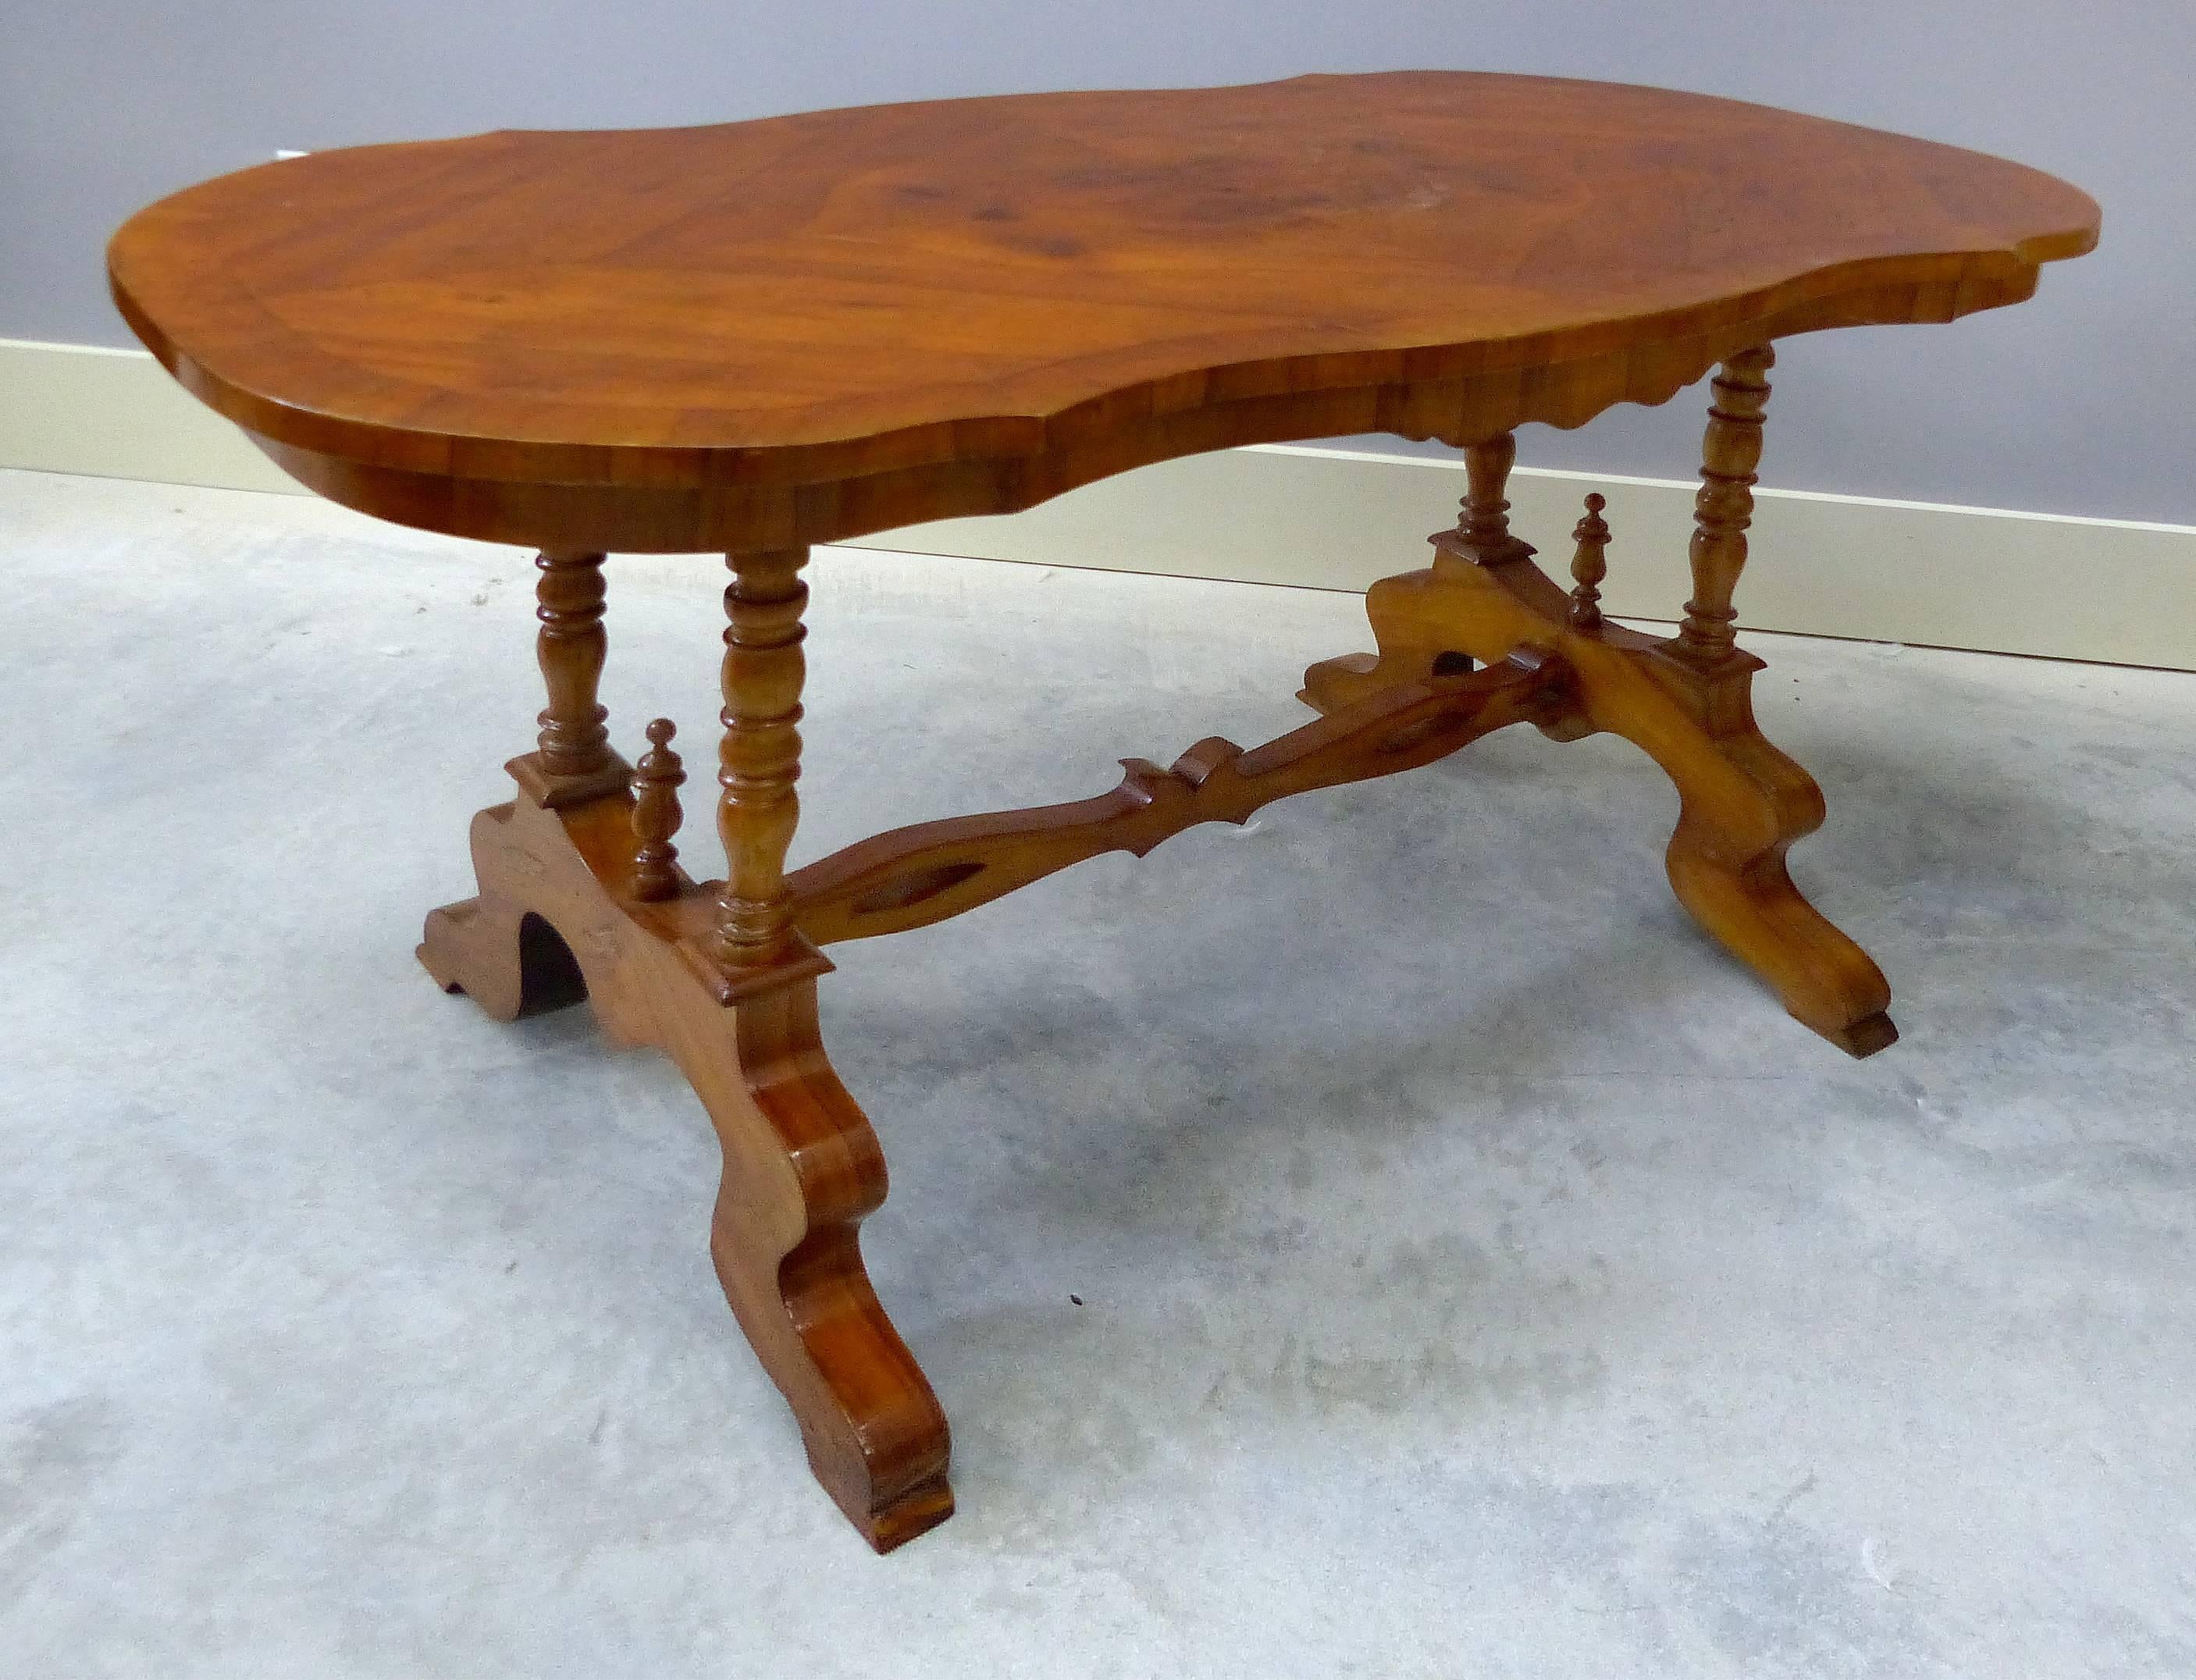 19th Century Austrian Biedermeier Centre Table

This is an Austrian 19th century Biedermeier scalloped rectangular centre table having finely turned legs which support a matched grain veneer top with banding. The centre stretcher is carved out and